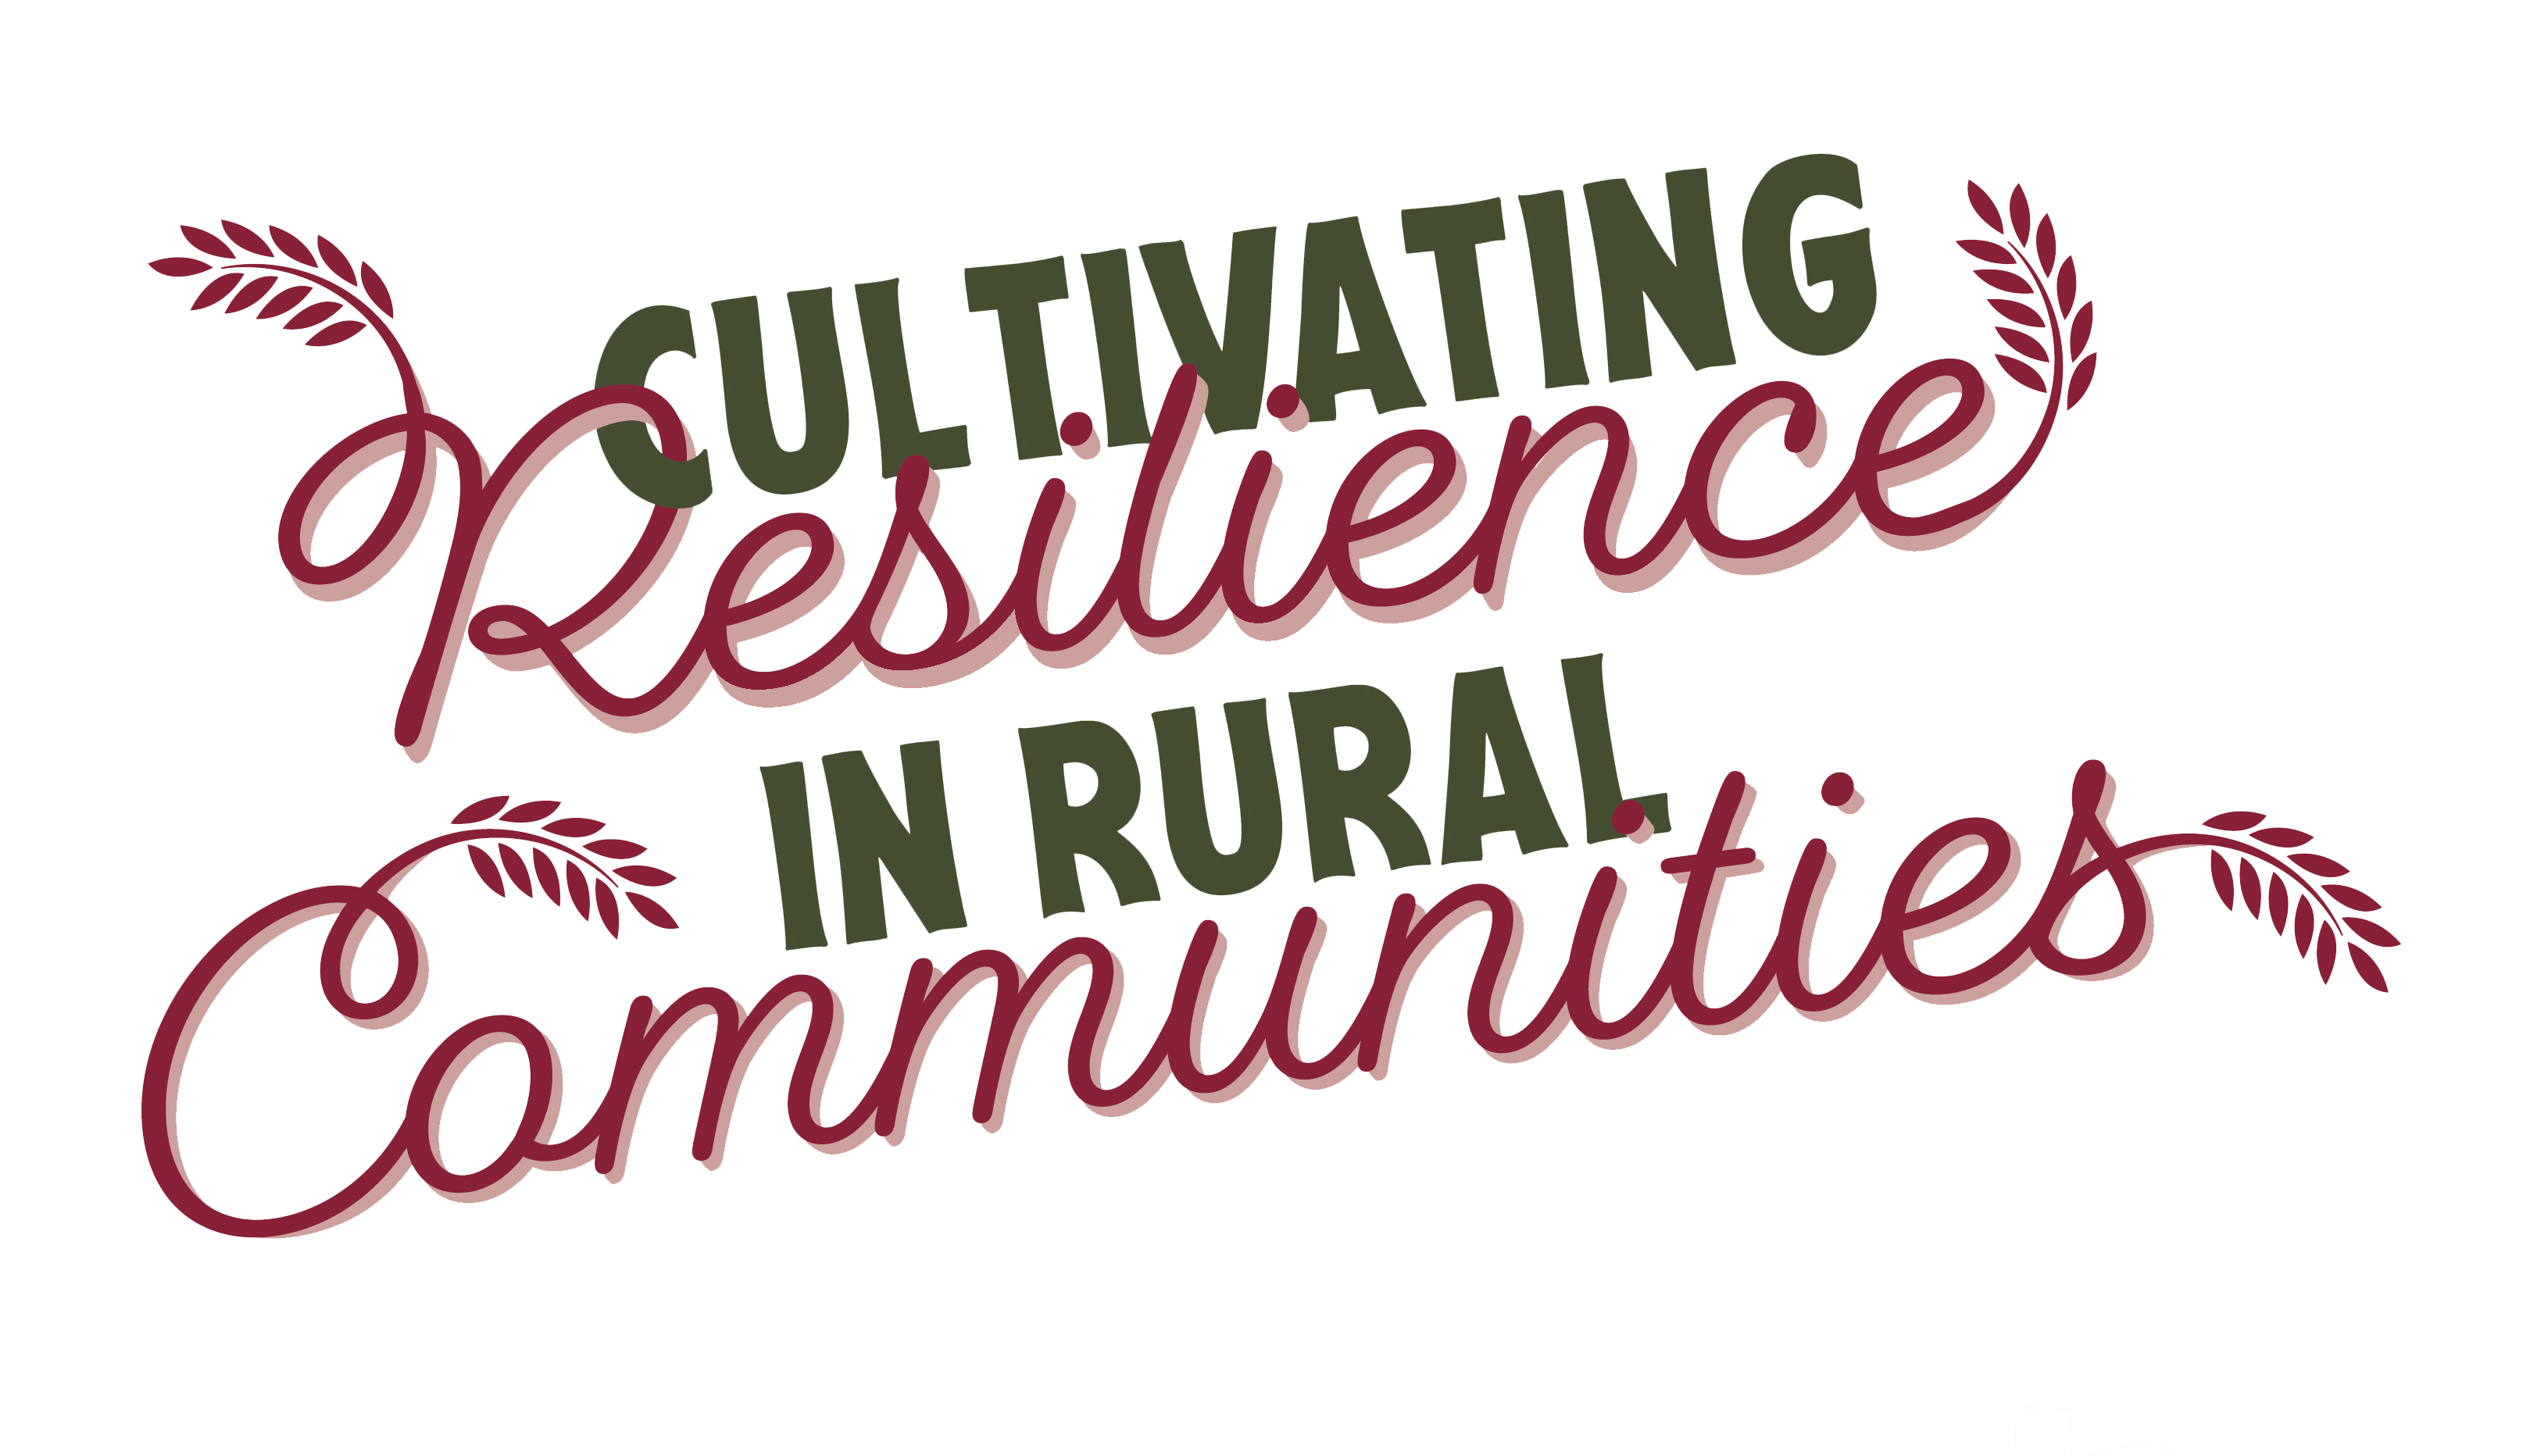 Cultivating Resilience in Rural Communities Toolkit